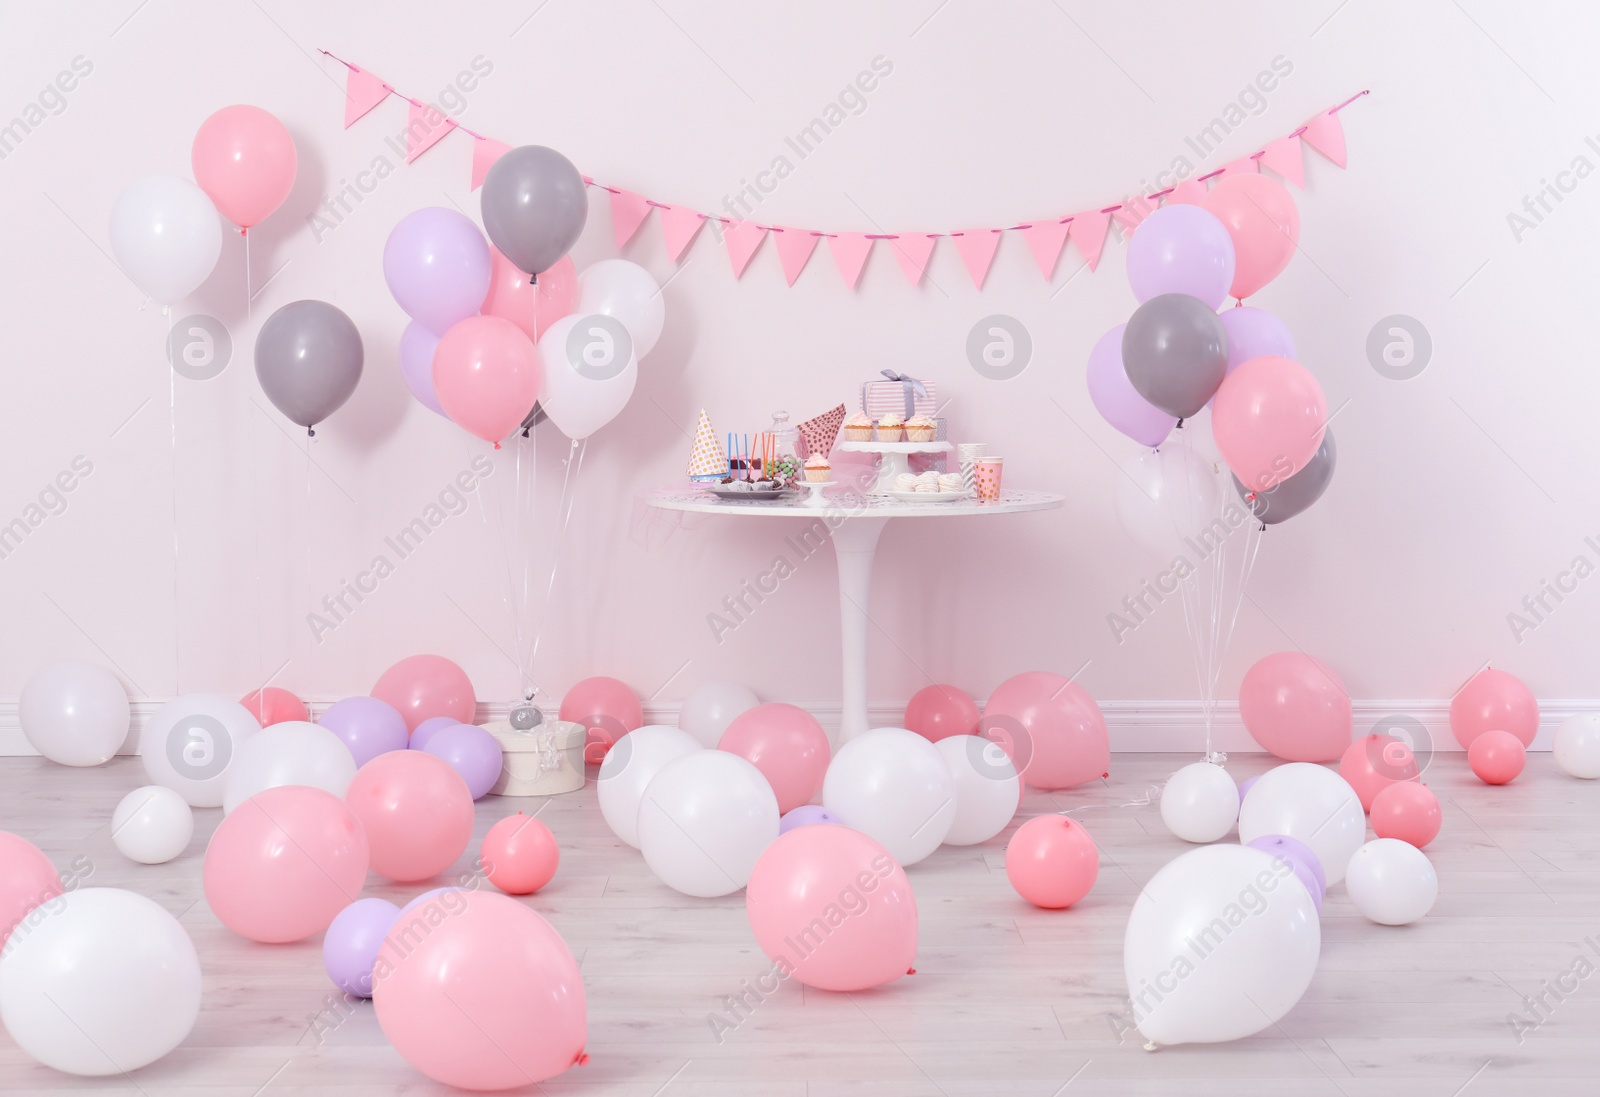 Photo of Party treats and items on table in room decorated with balloons